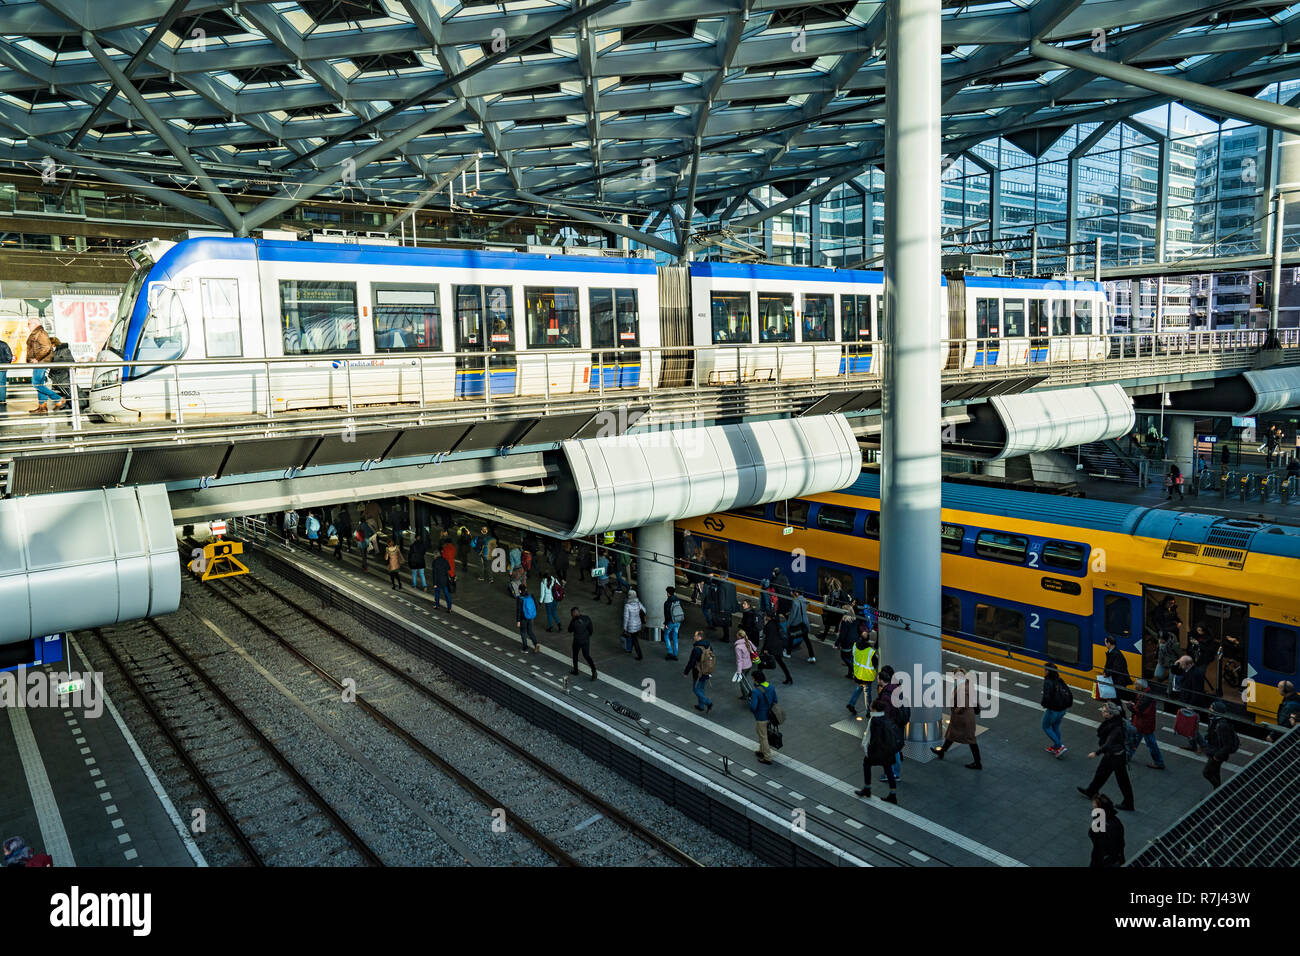 Tram at platform at  Den Haag Centraal railway station in The Hague, Netherlands Stock Photo